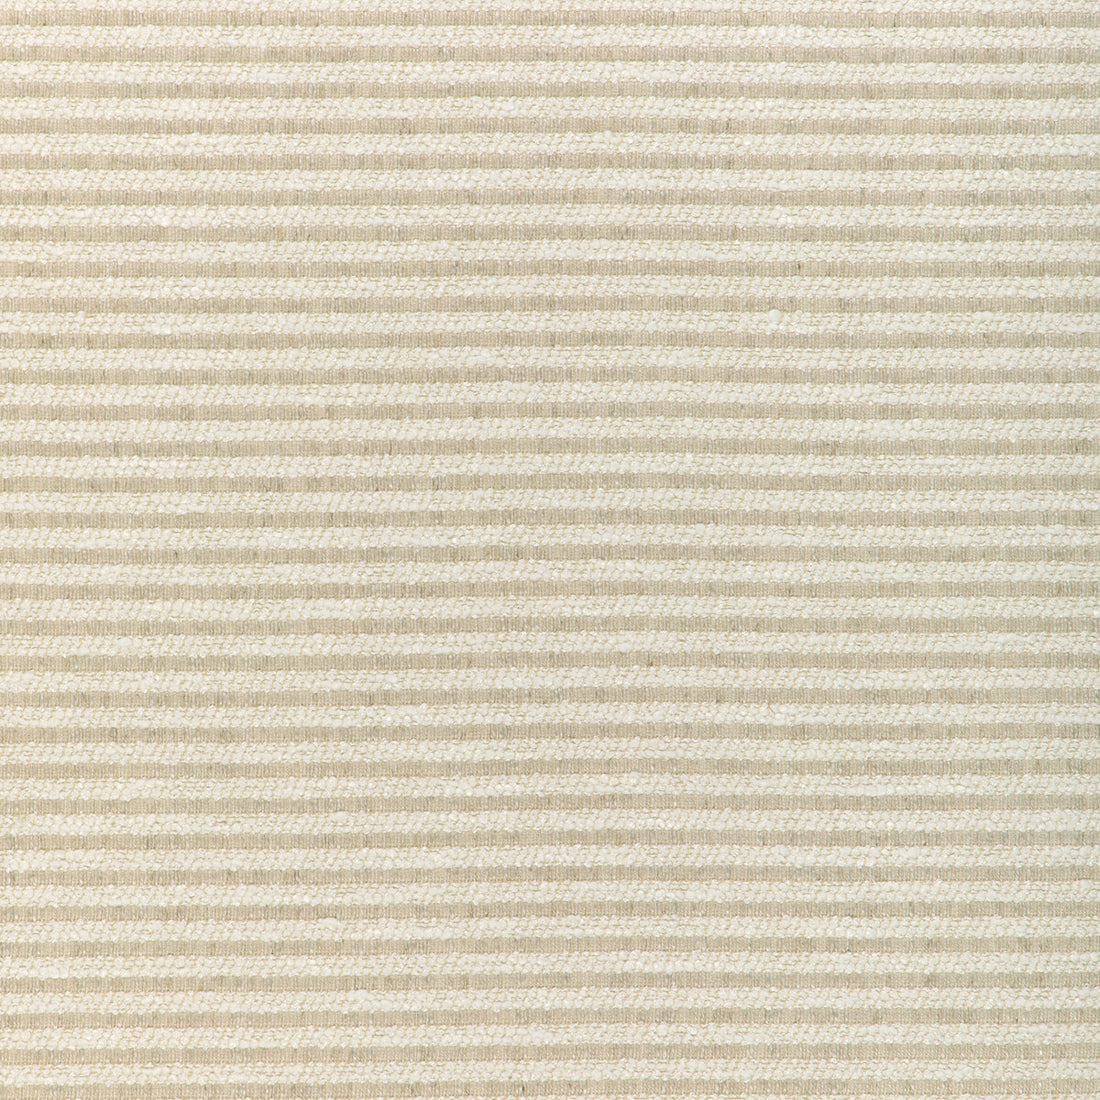 Plushy Stripe fabric in flax color - pattern 36859.116.0 - by Kravet Couture in the Atelier Weaves collection